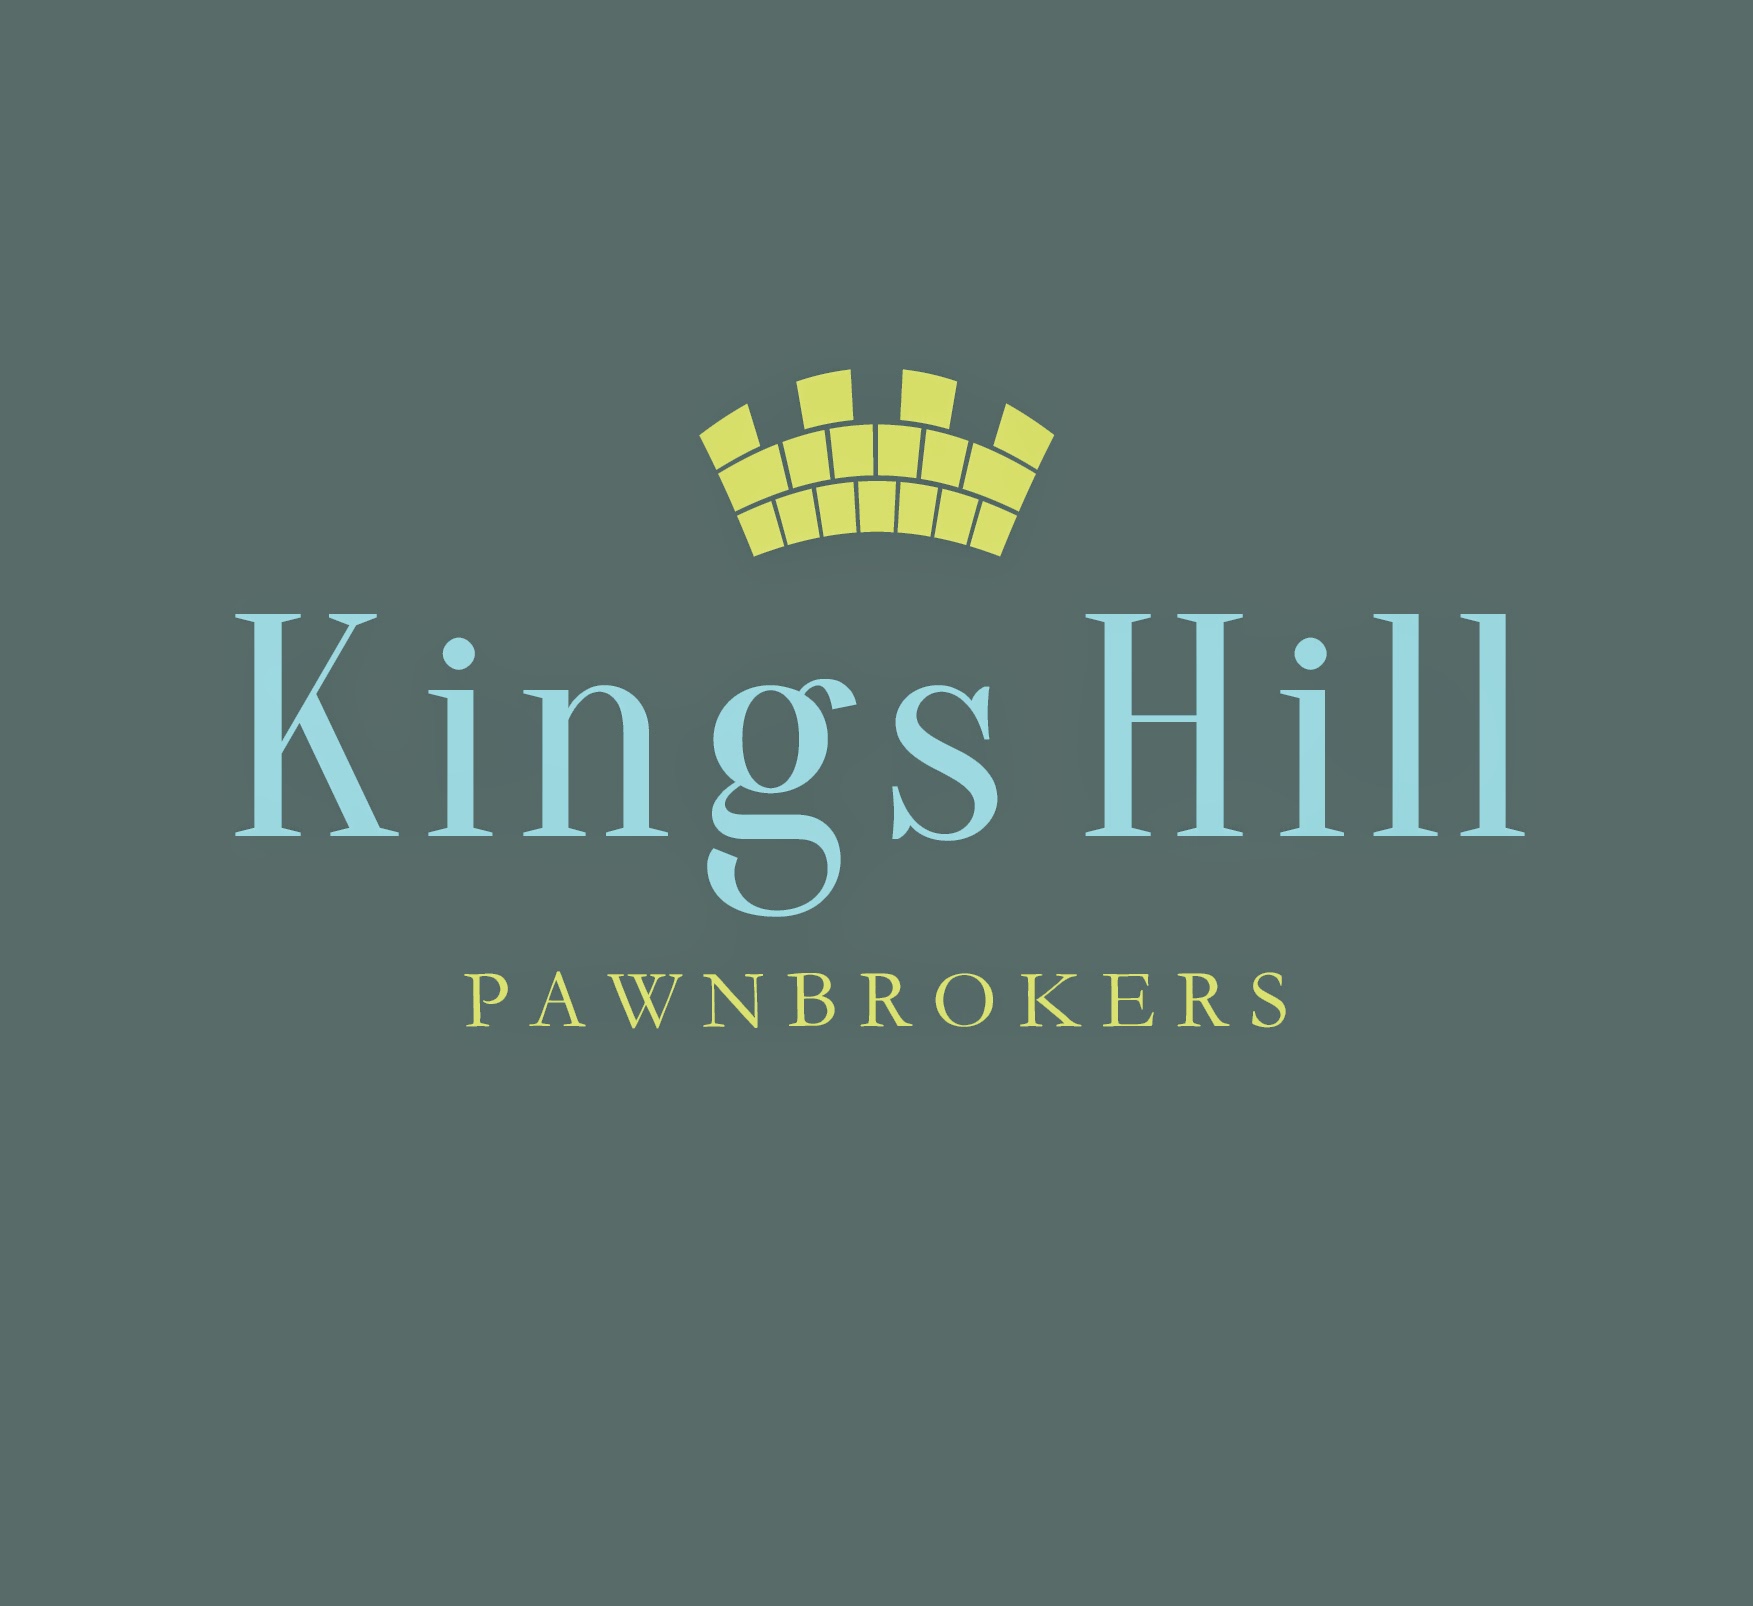 Kings Hill Pawnbrokers 06